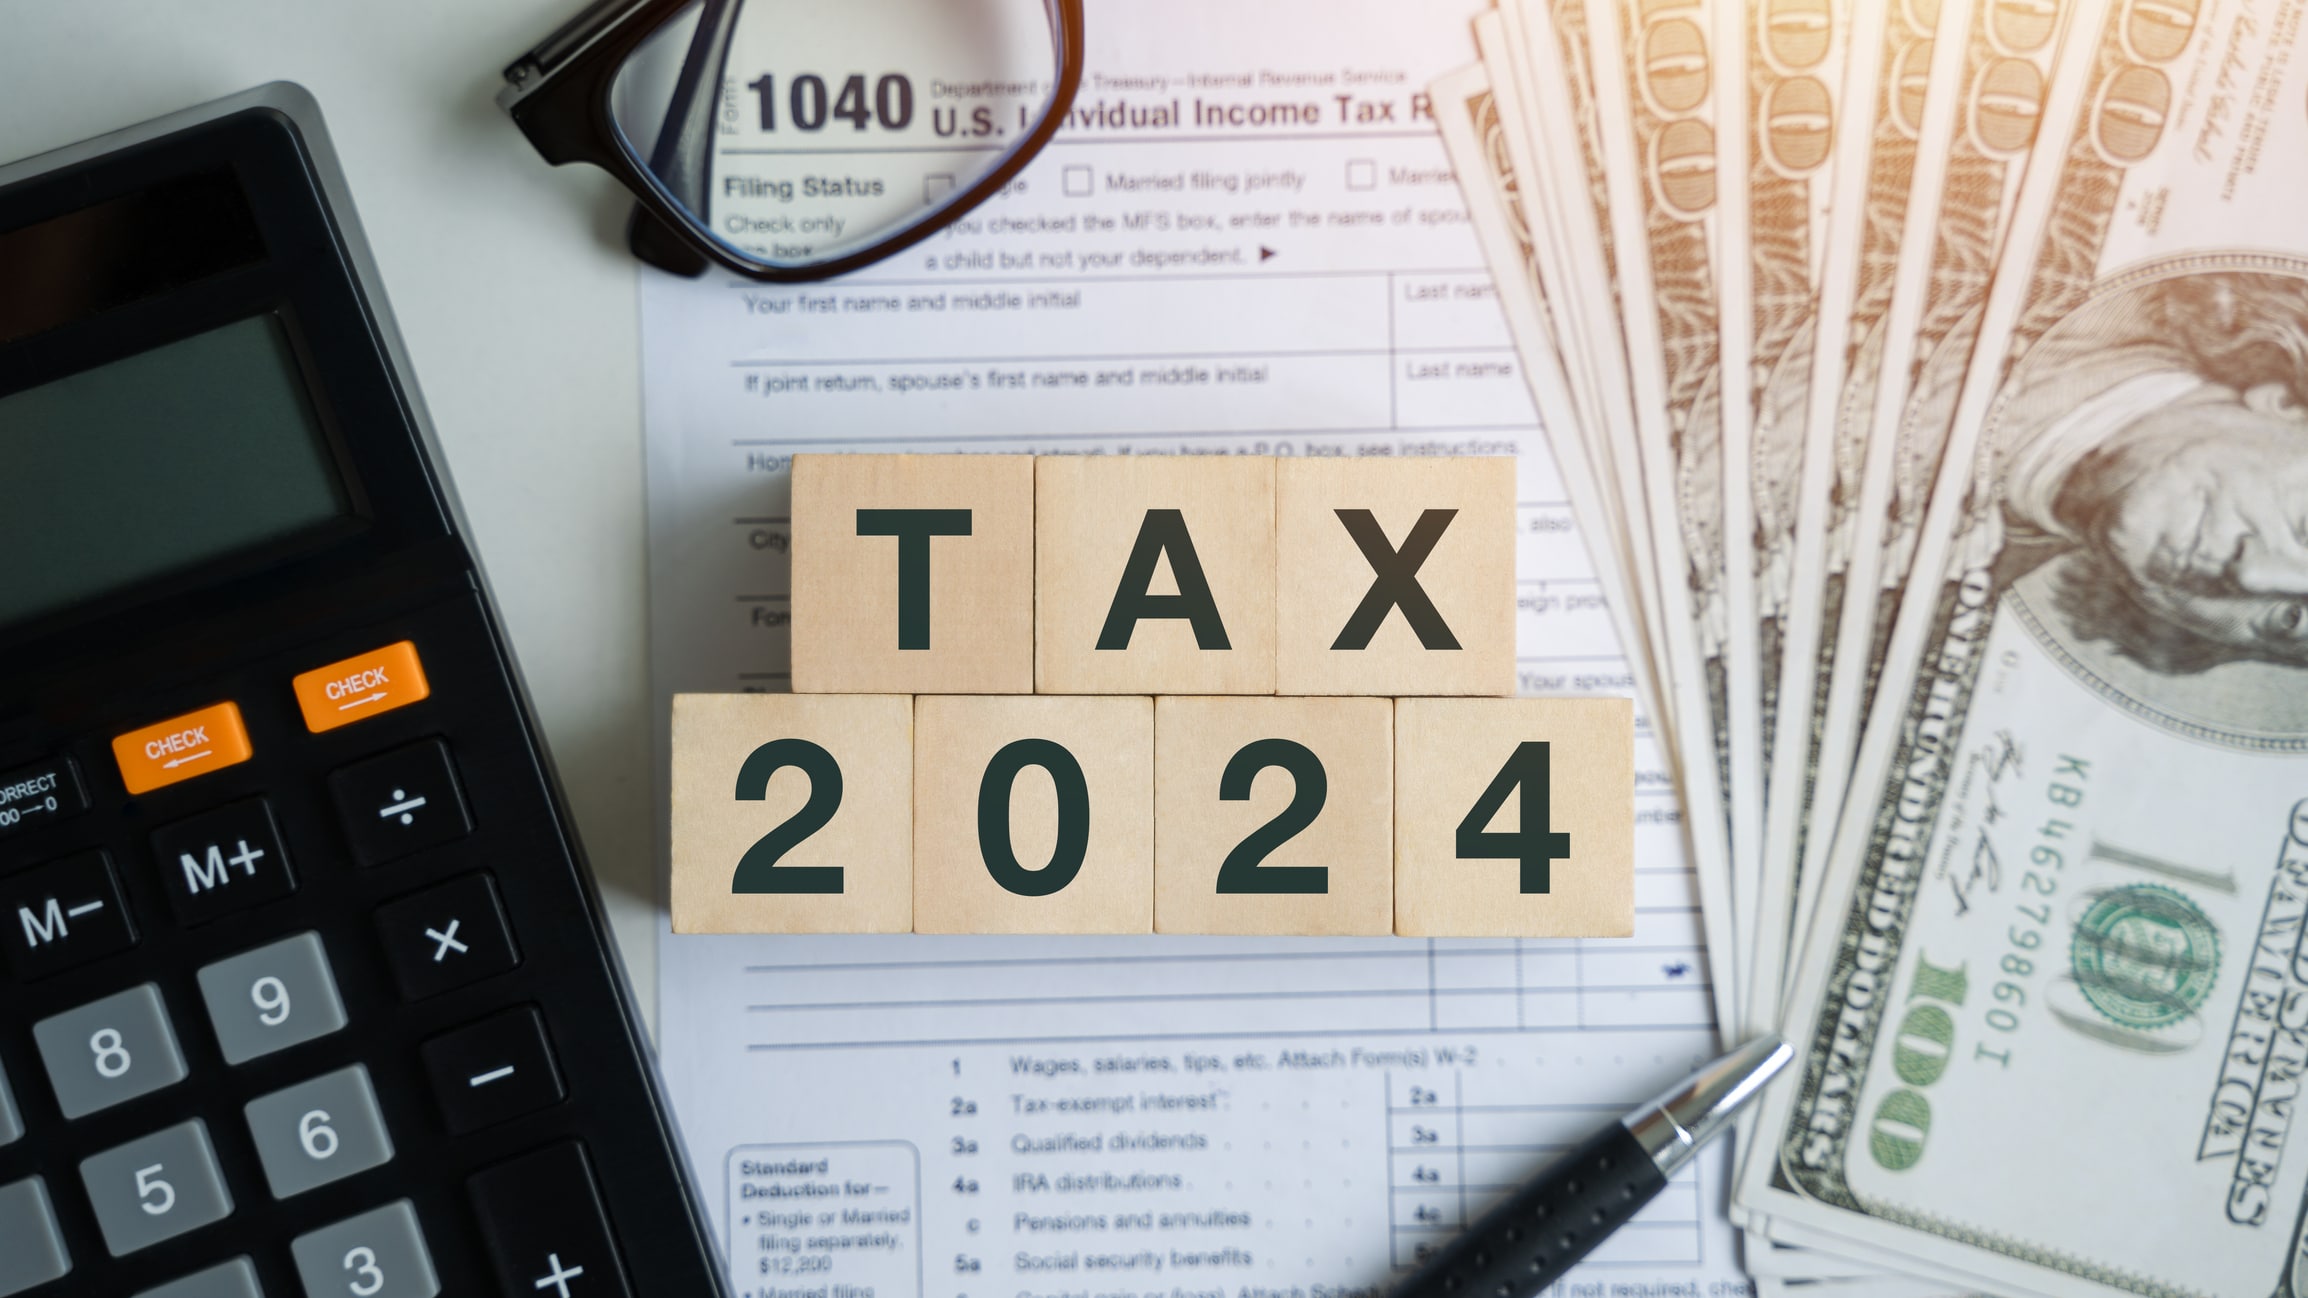 Tax credits 2024 on wooden blocks. Business and tax concept. Calculator, currency, book, tax forms. Financial calculations, tax, accounting, statistics and analytical research concepts.